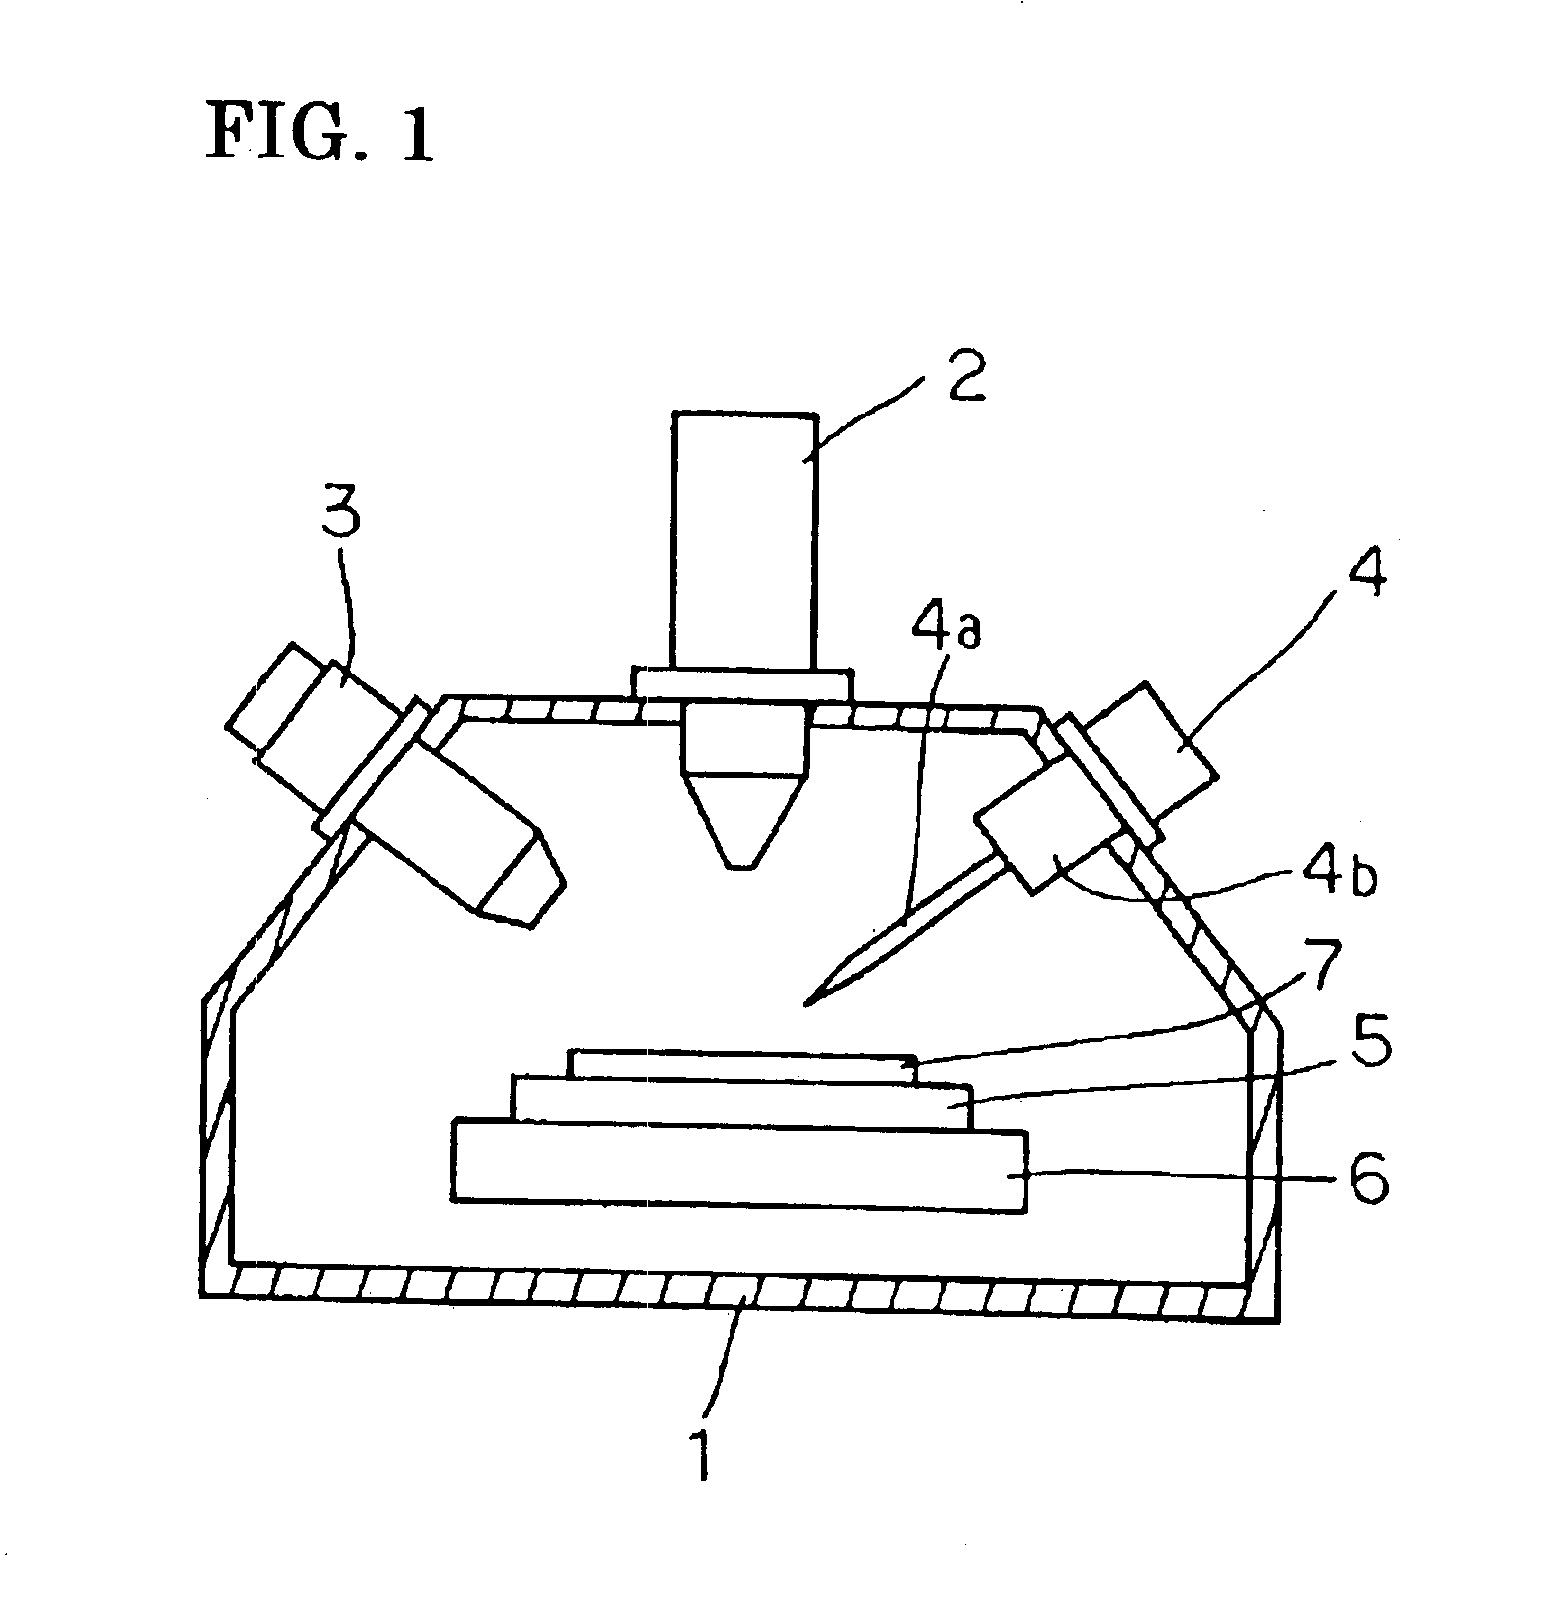 Apparatus for processing and observing a sample